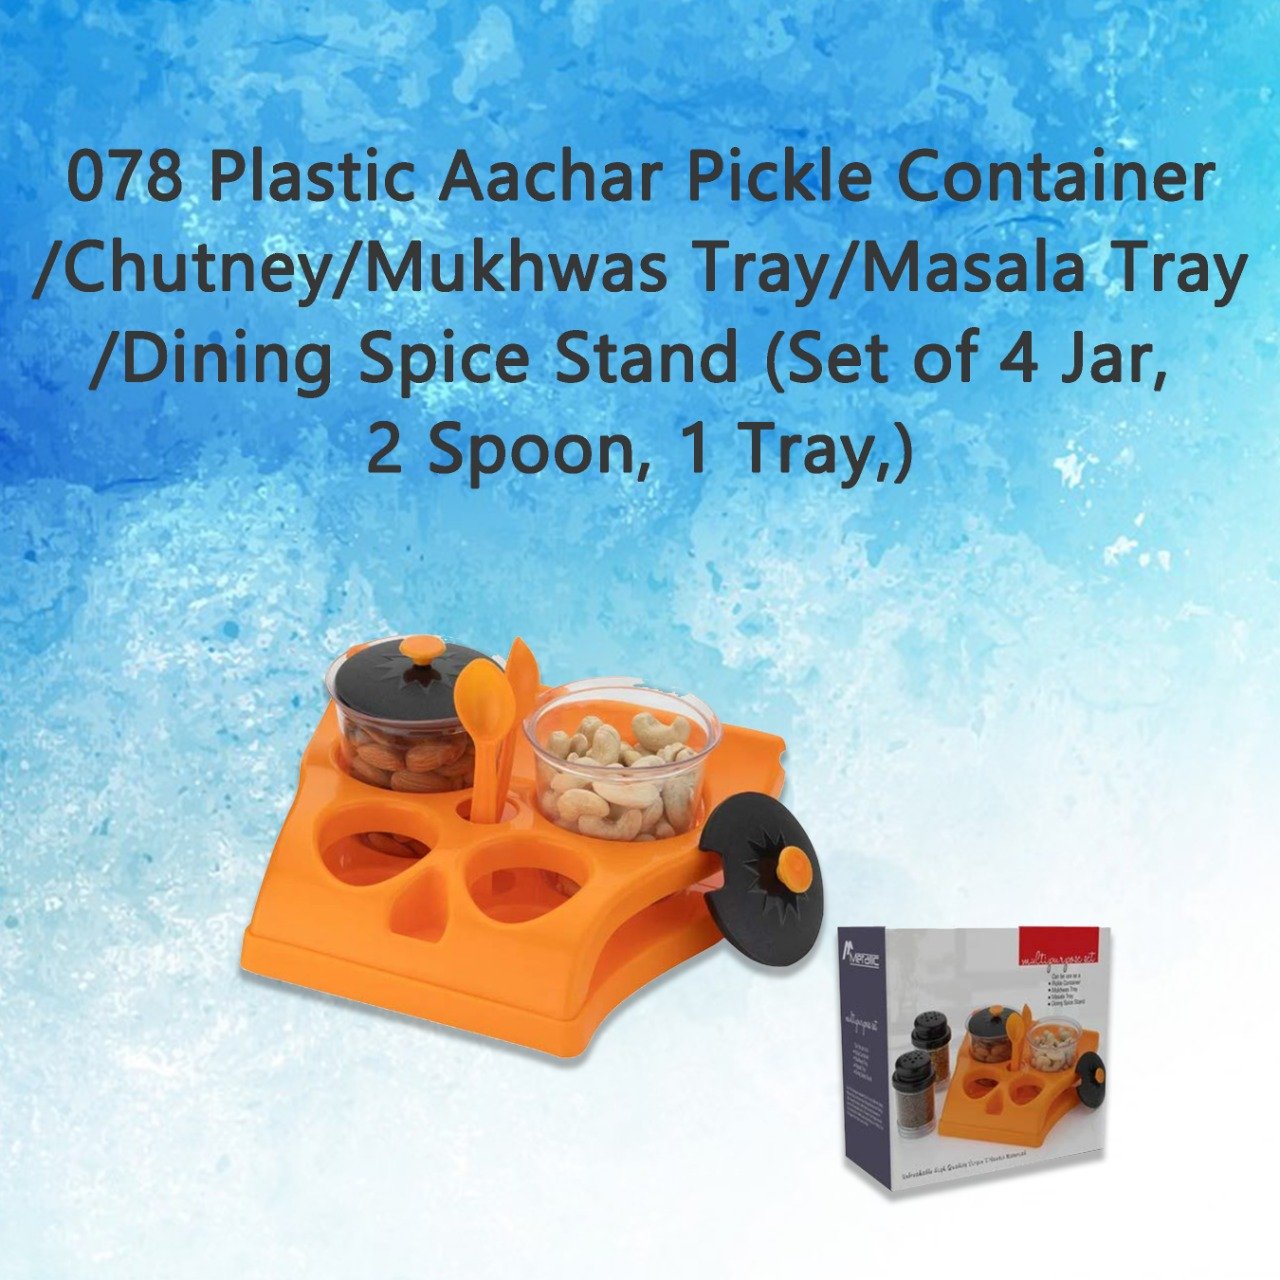 0078 Plastic Aachar Pickle Container/Chutney/Mukhwas Tray/Masala Tray/Dining Spice Stand (Set of 4 Jar, 2 Spoon, 1 Tray,) - SkyShopy